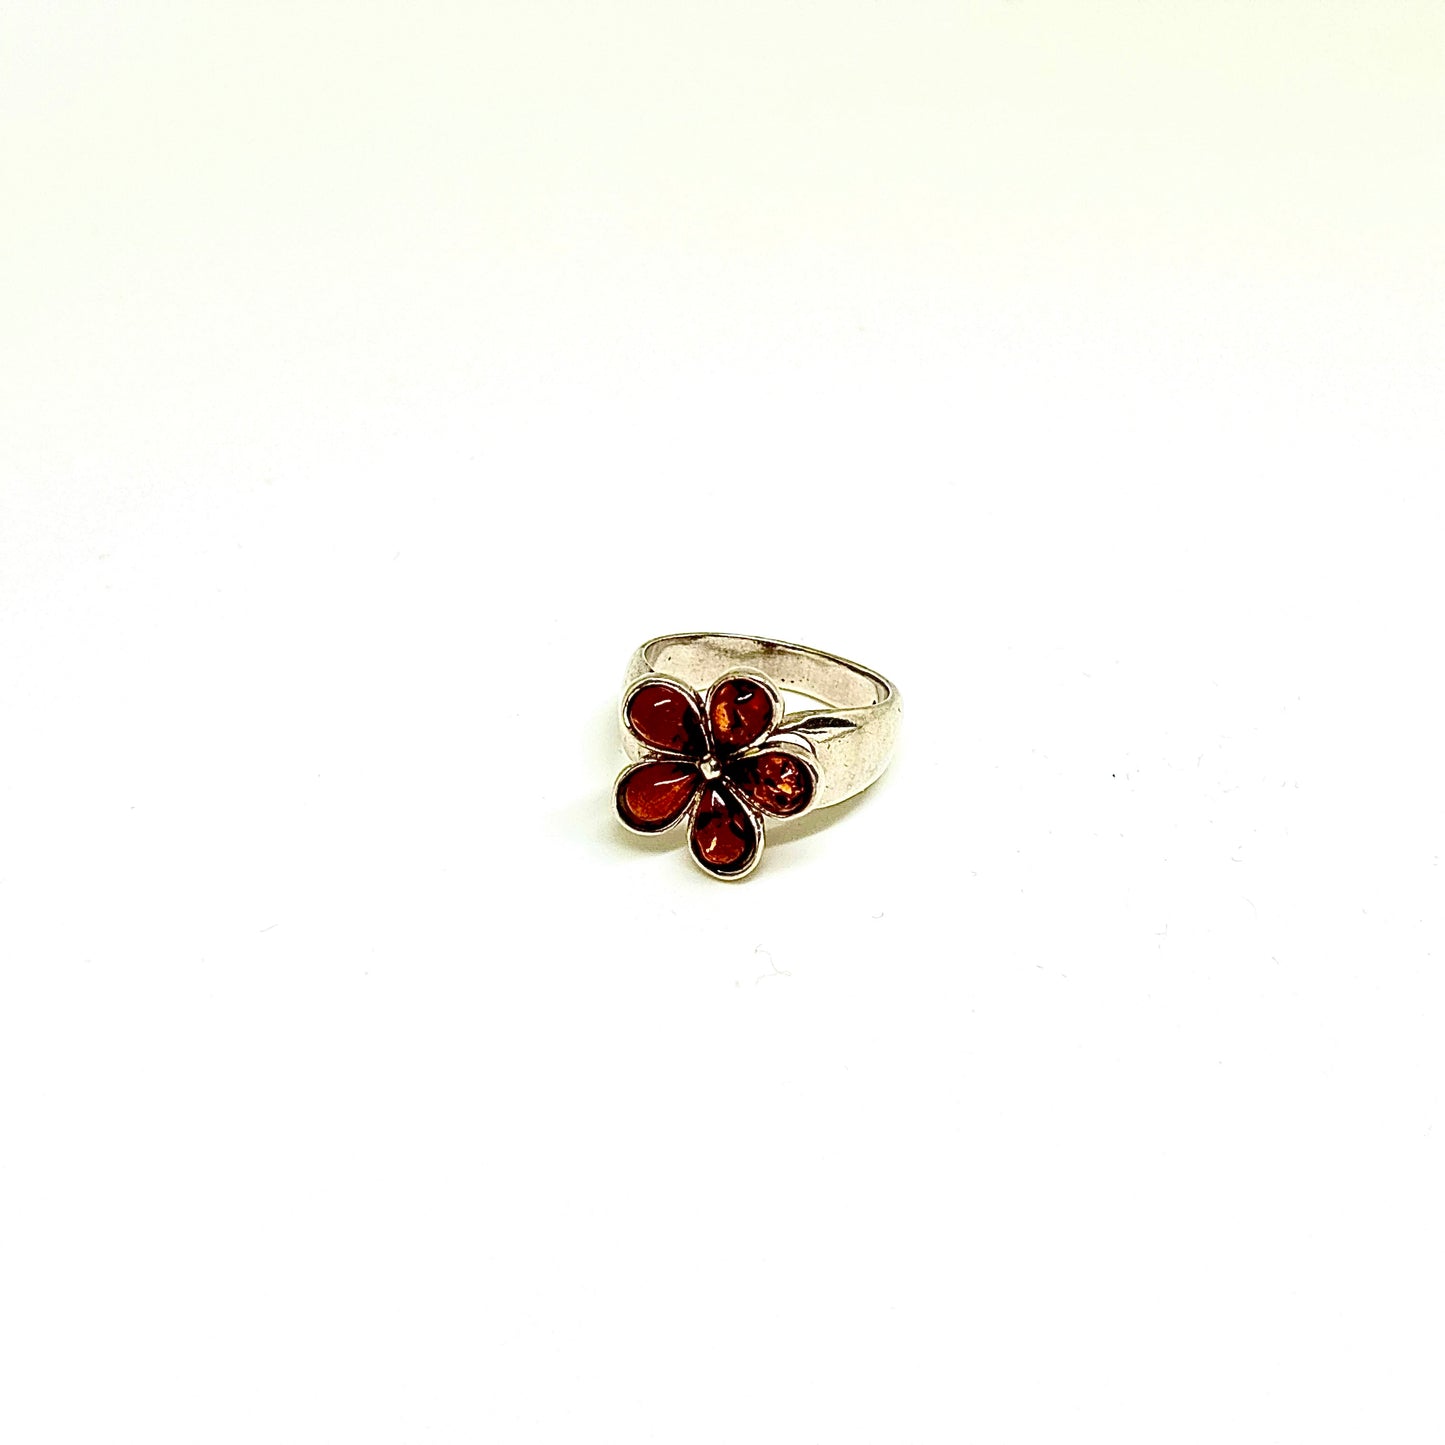 Cognac Color Baltic Amber Flower Ring